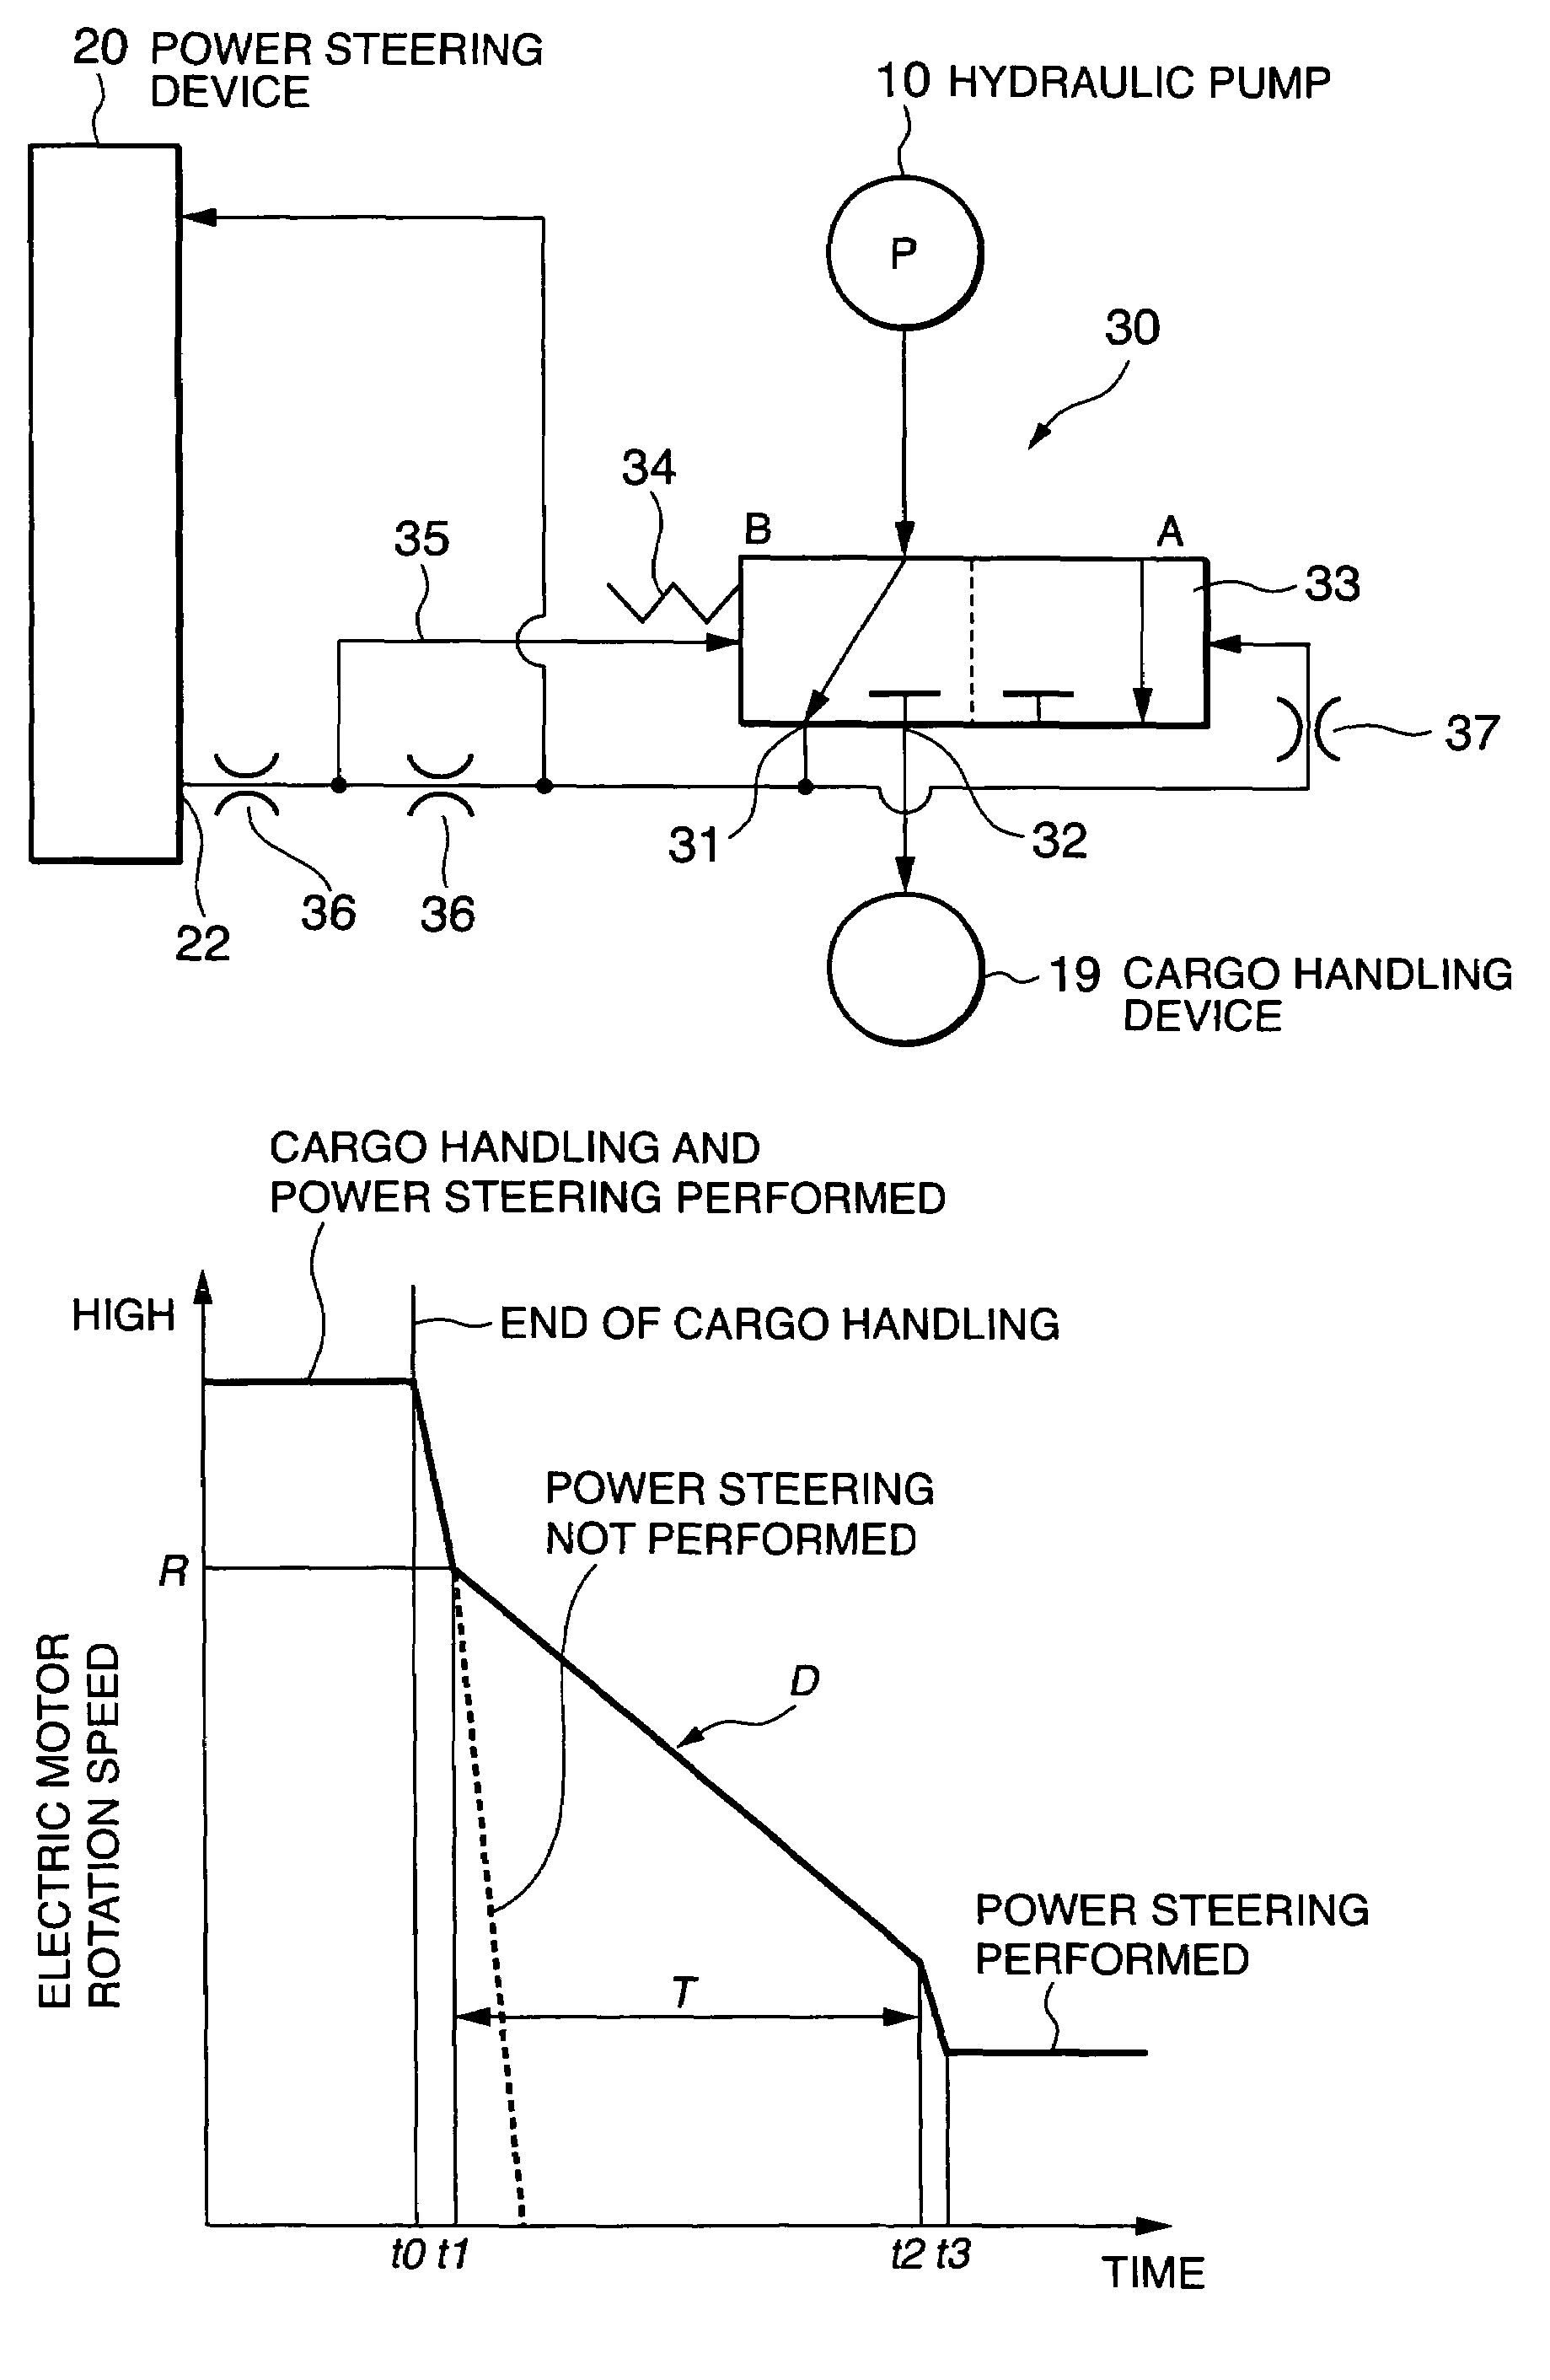 Hydraulic pressure supply control in industrial vehicle